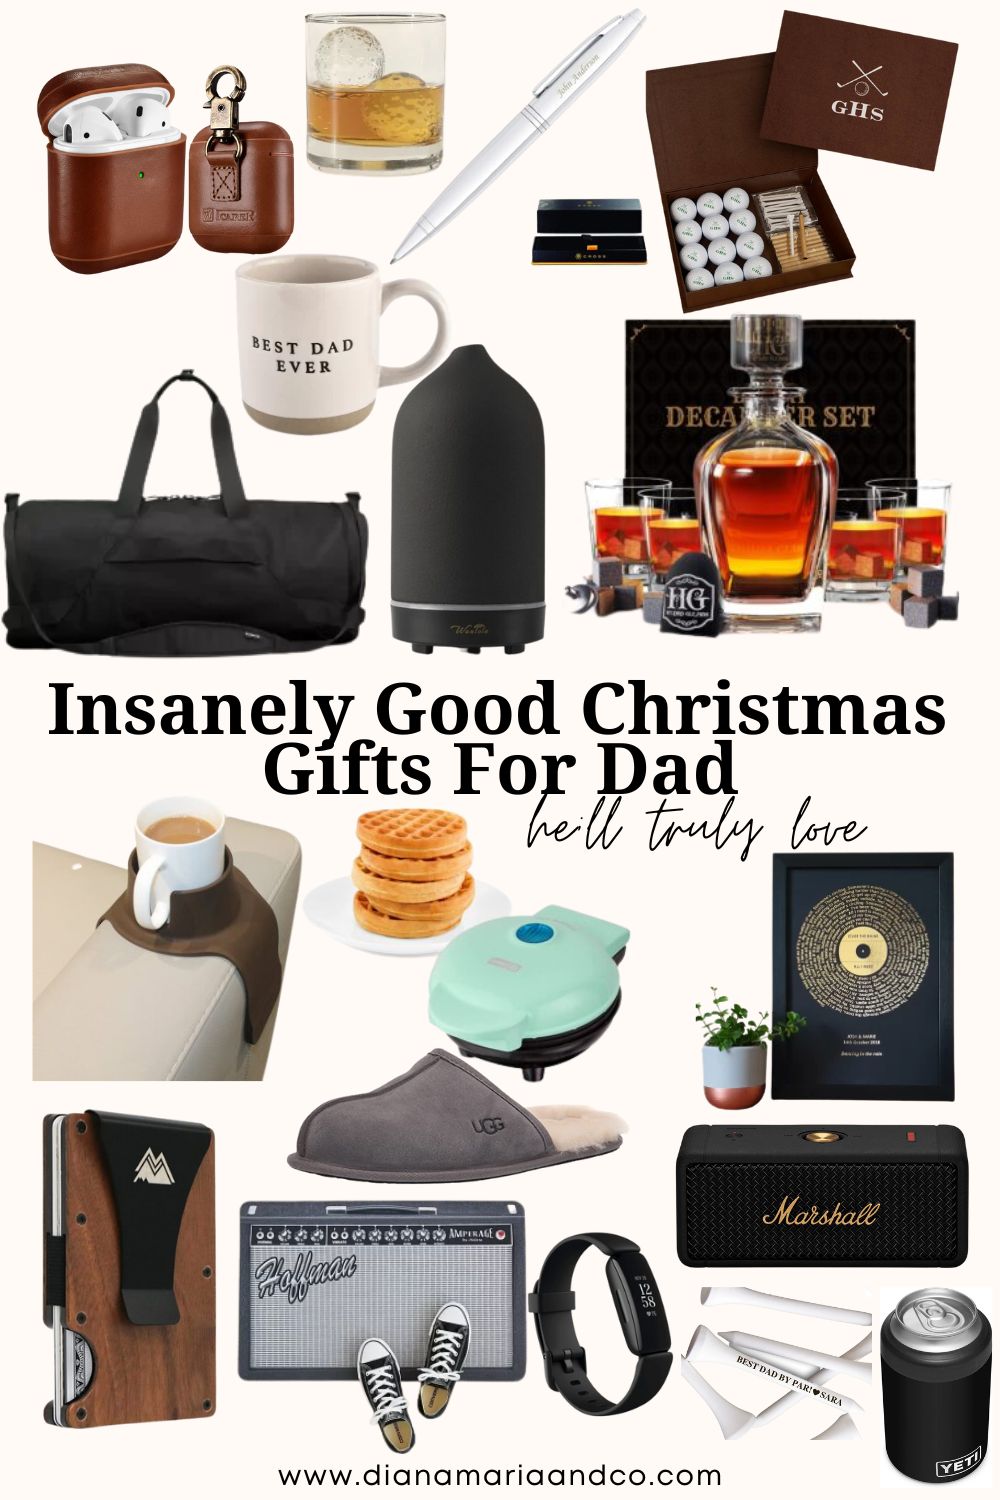 Insanely Good Christmas Gifts For Dad - Diana Maria & Co